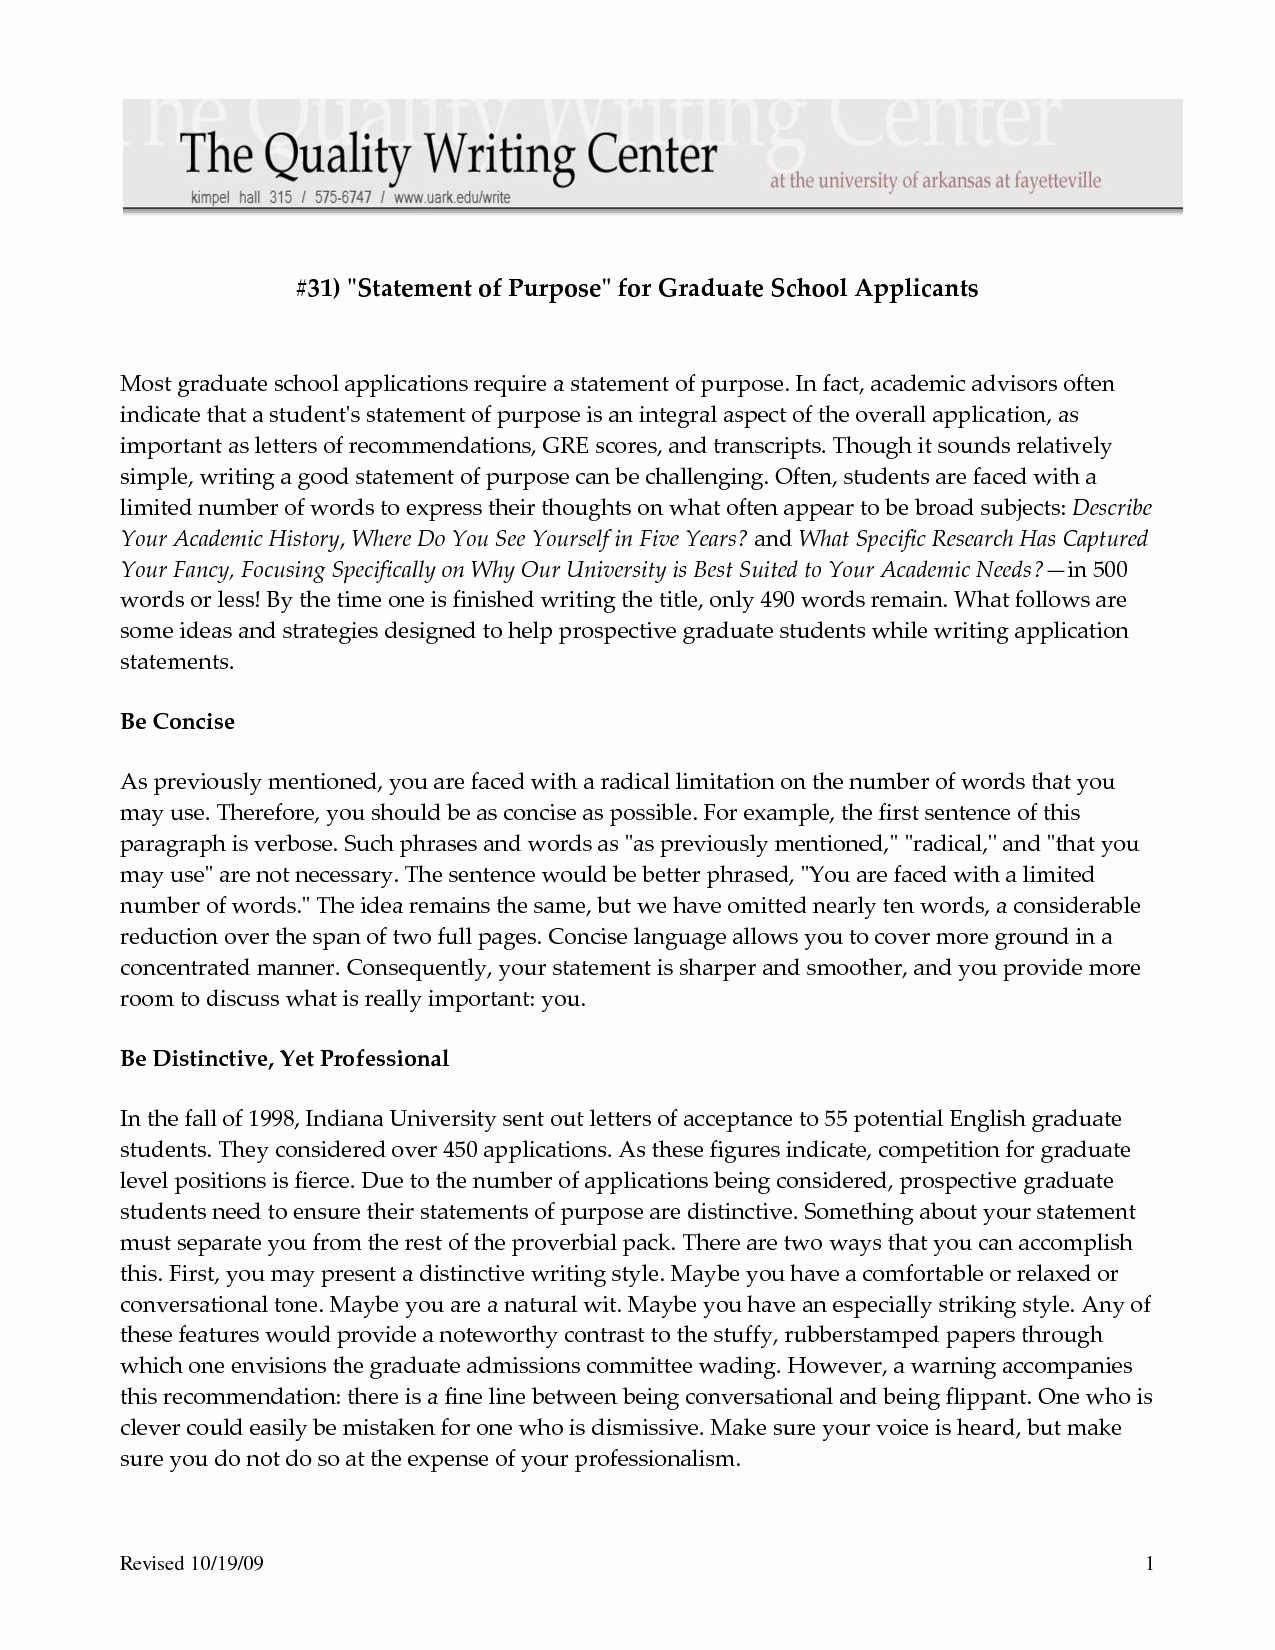 Personal Statement Of Intent Best Of Grad School Essay Letters Writefiction581 Web Fc2